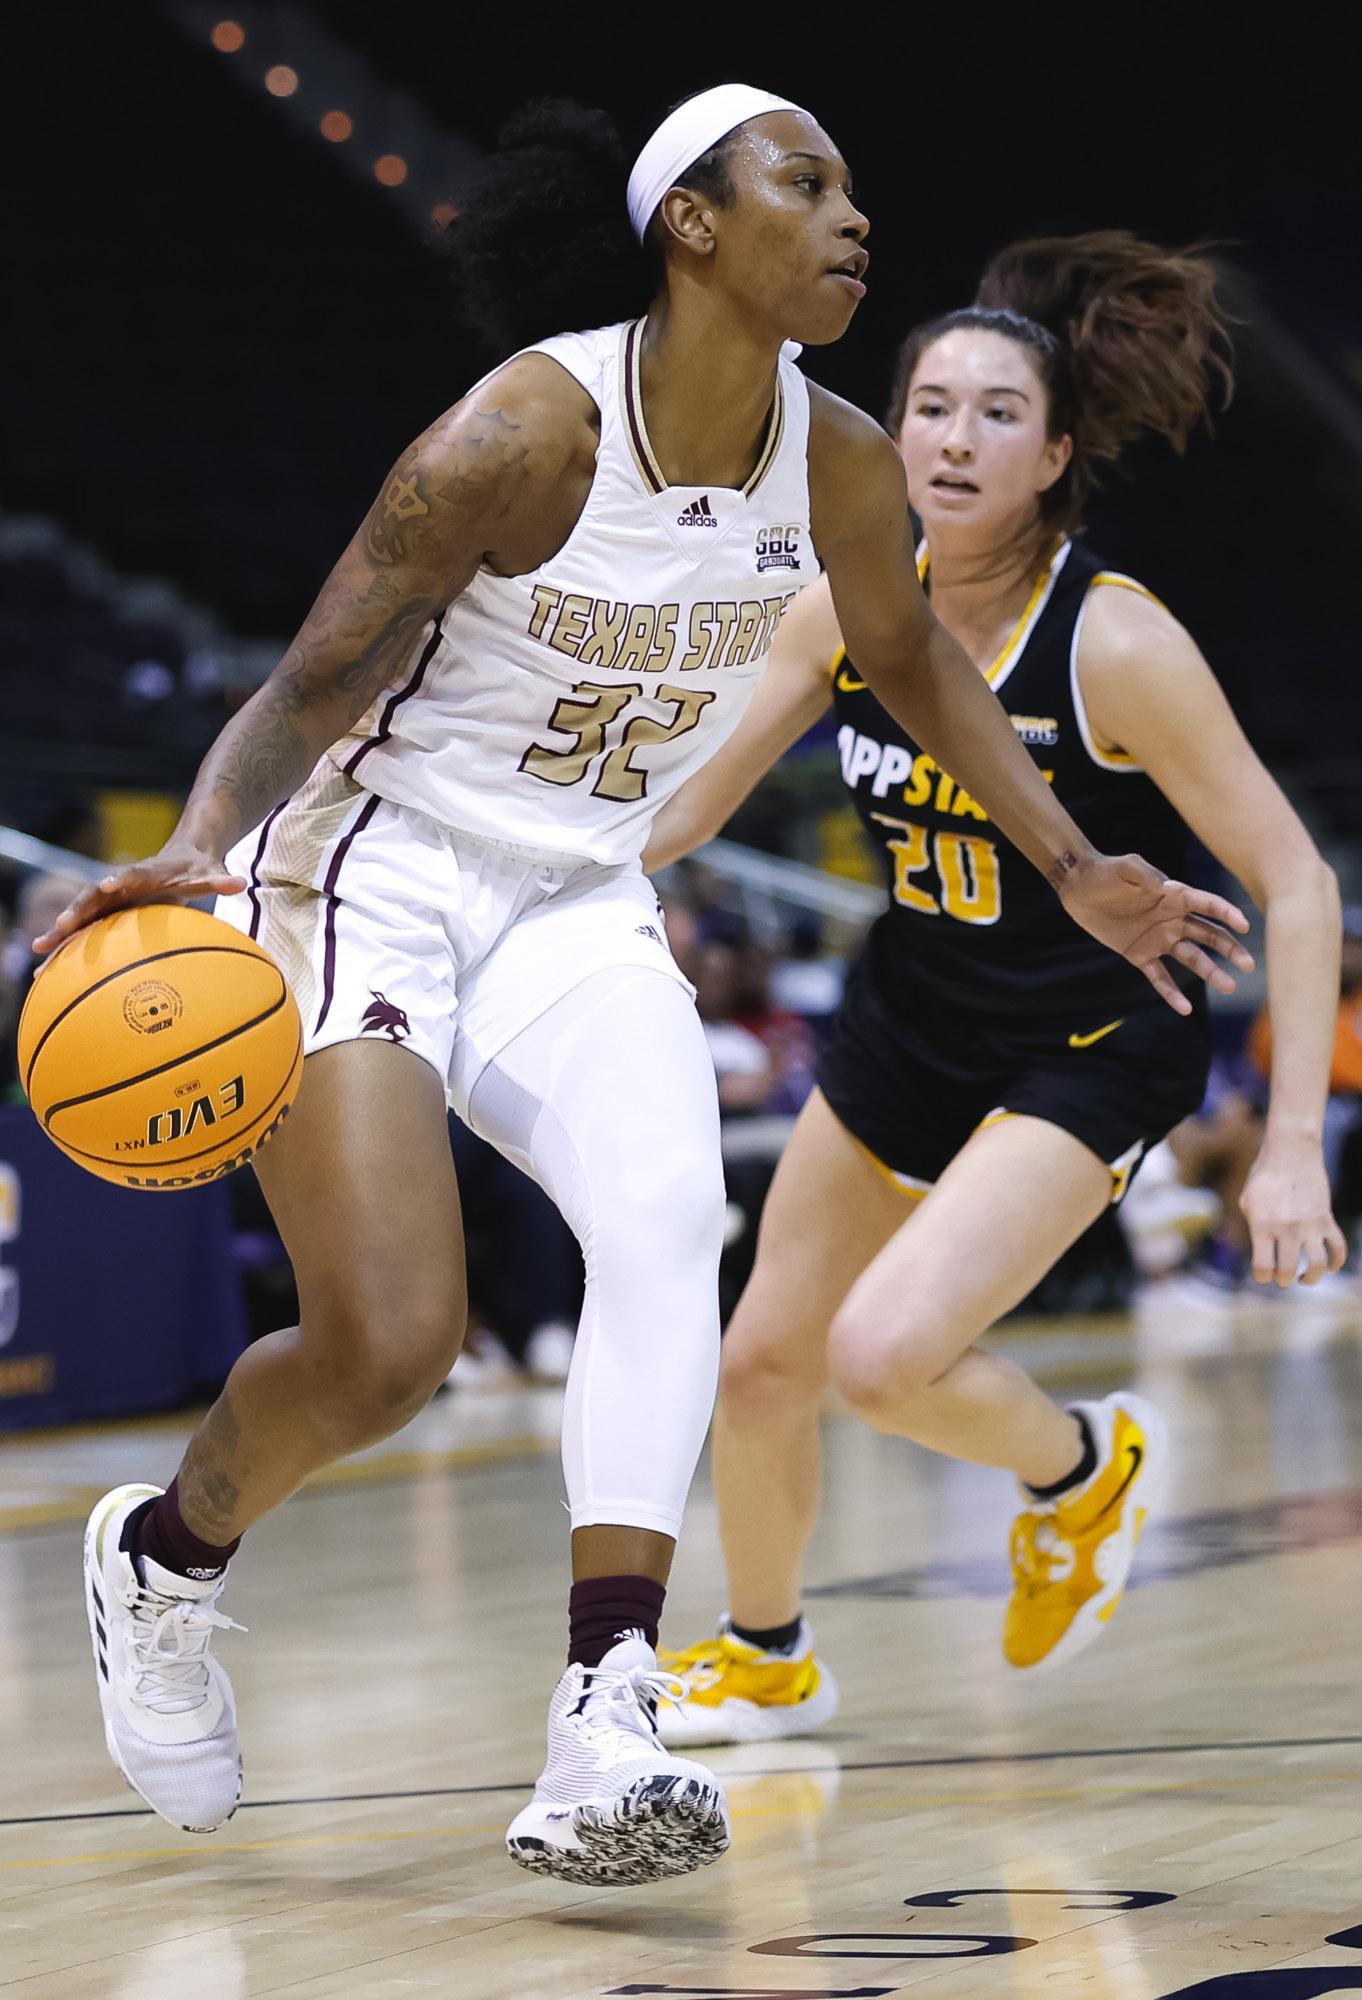 Texas State holds off App State for win